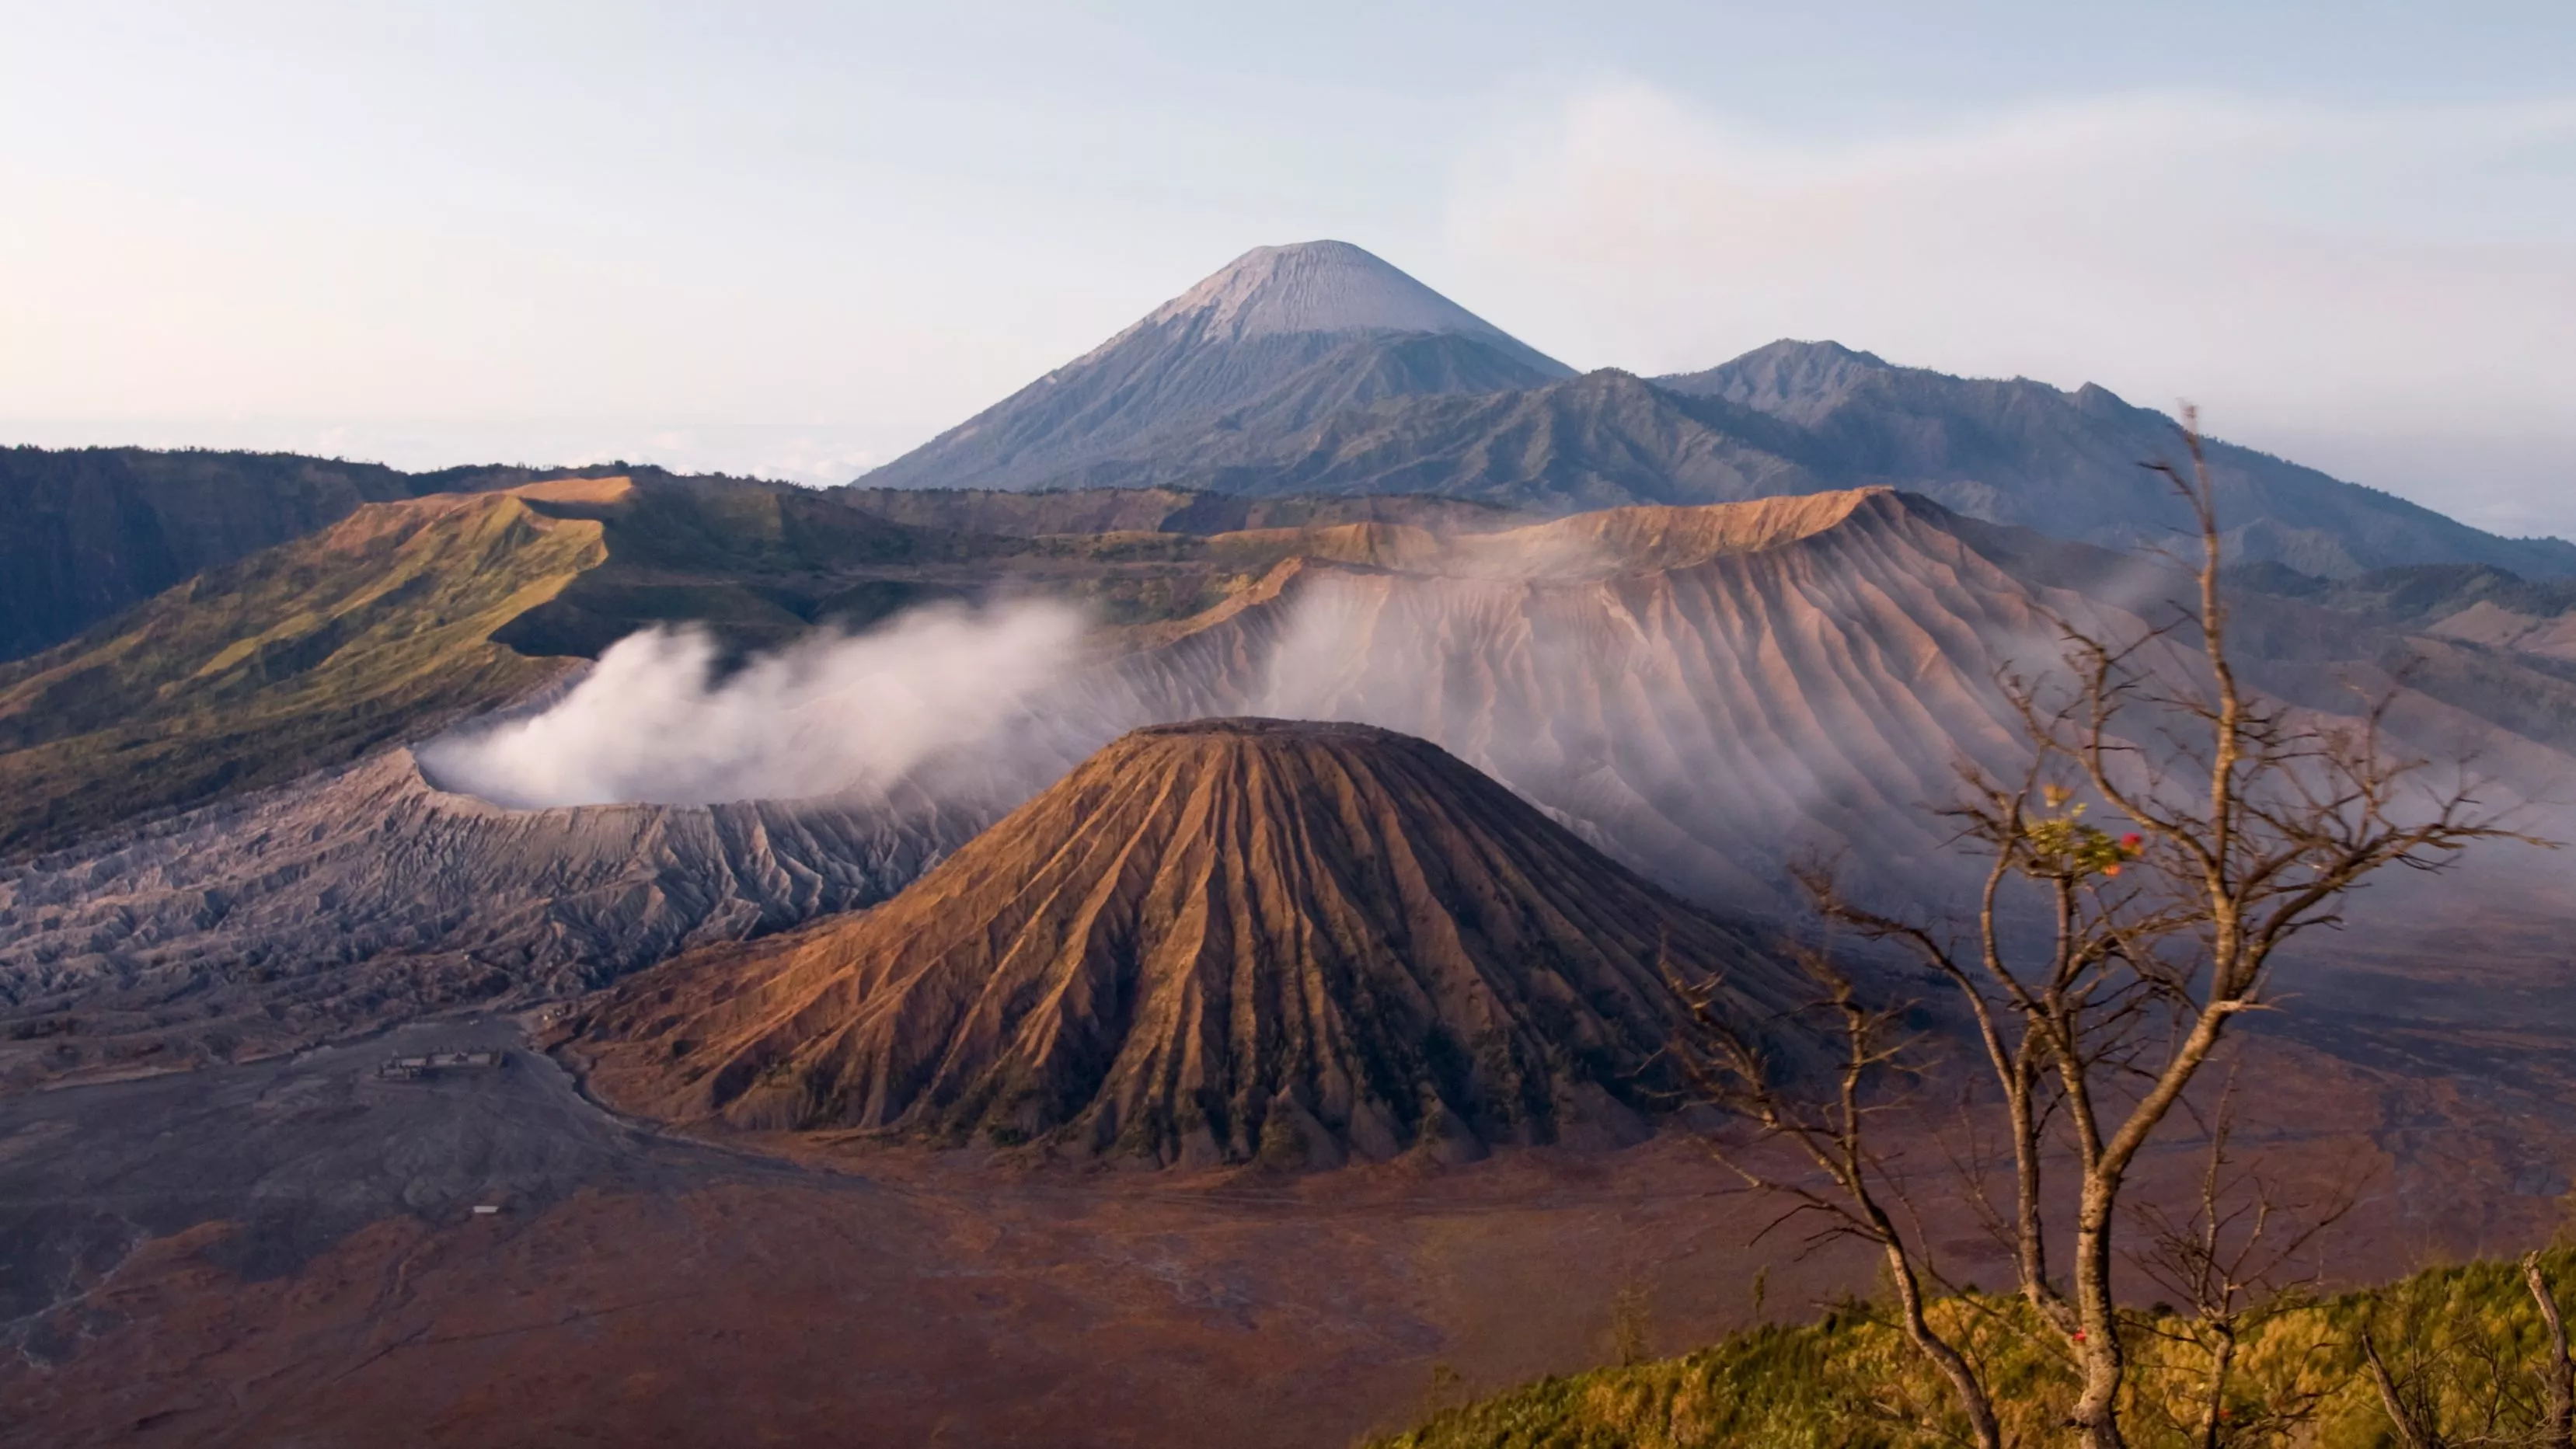 Volcano Bromo in Indonesia, Central Asia | Volcanos - Rated 7.6